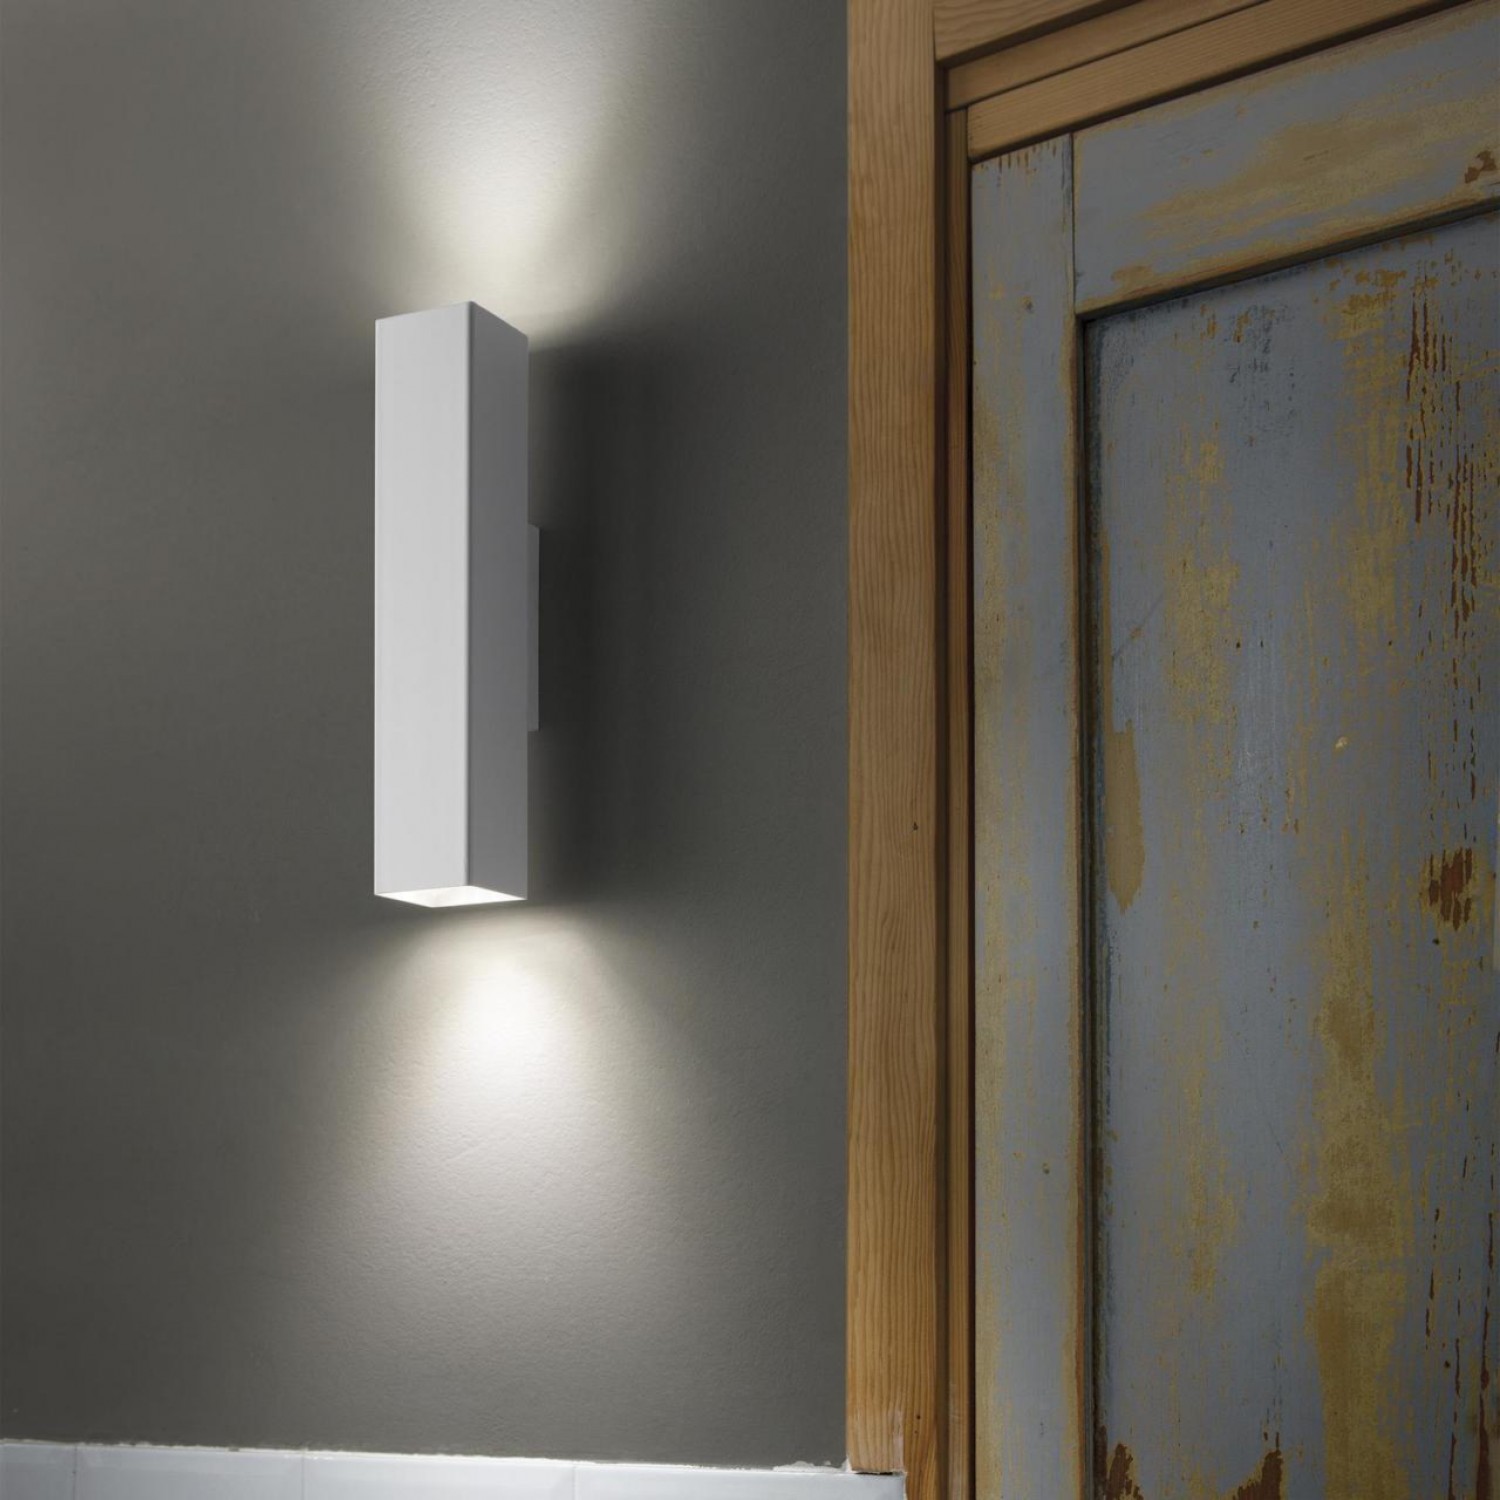 Бра Ideal Lux SKY AP2 ORO 136899